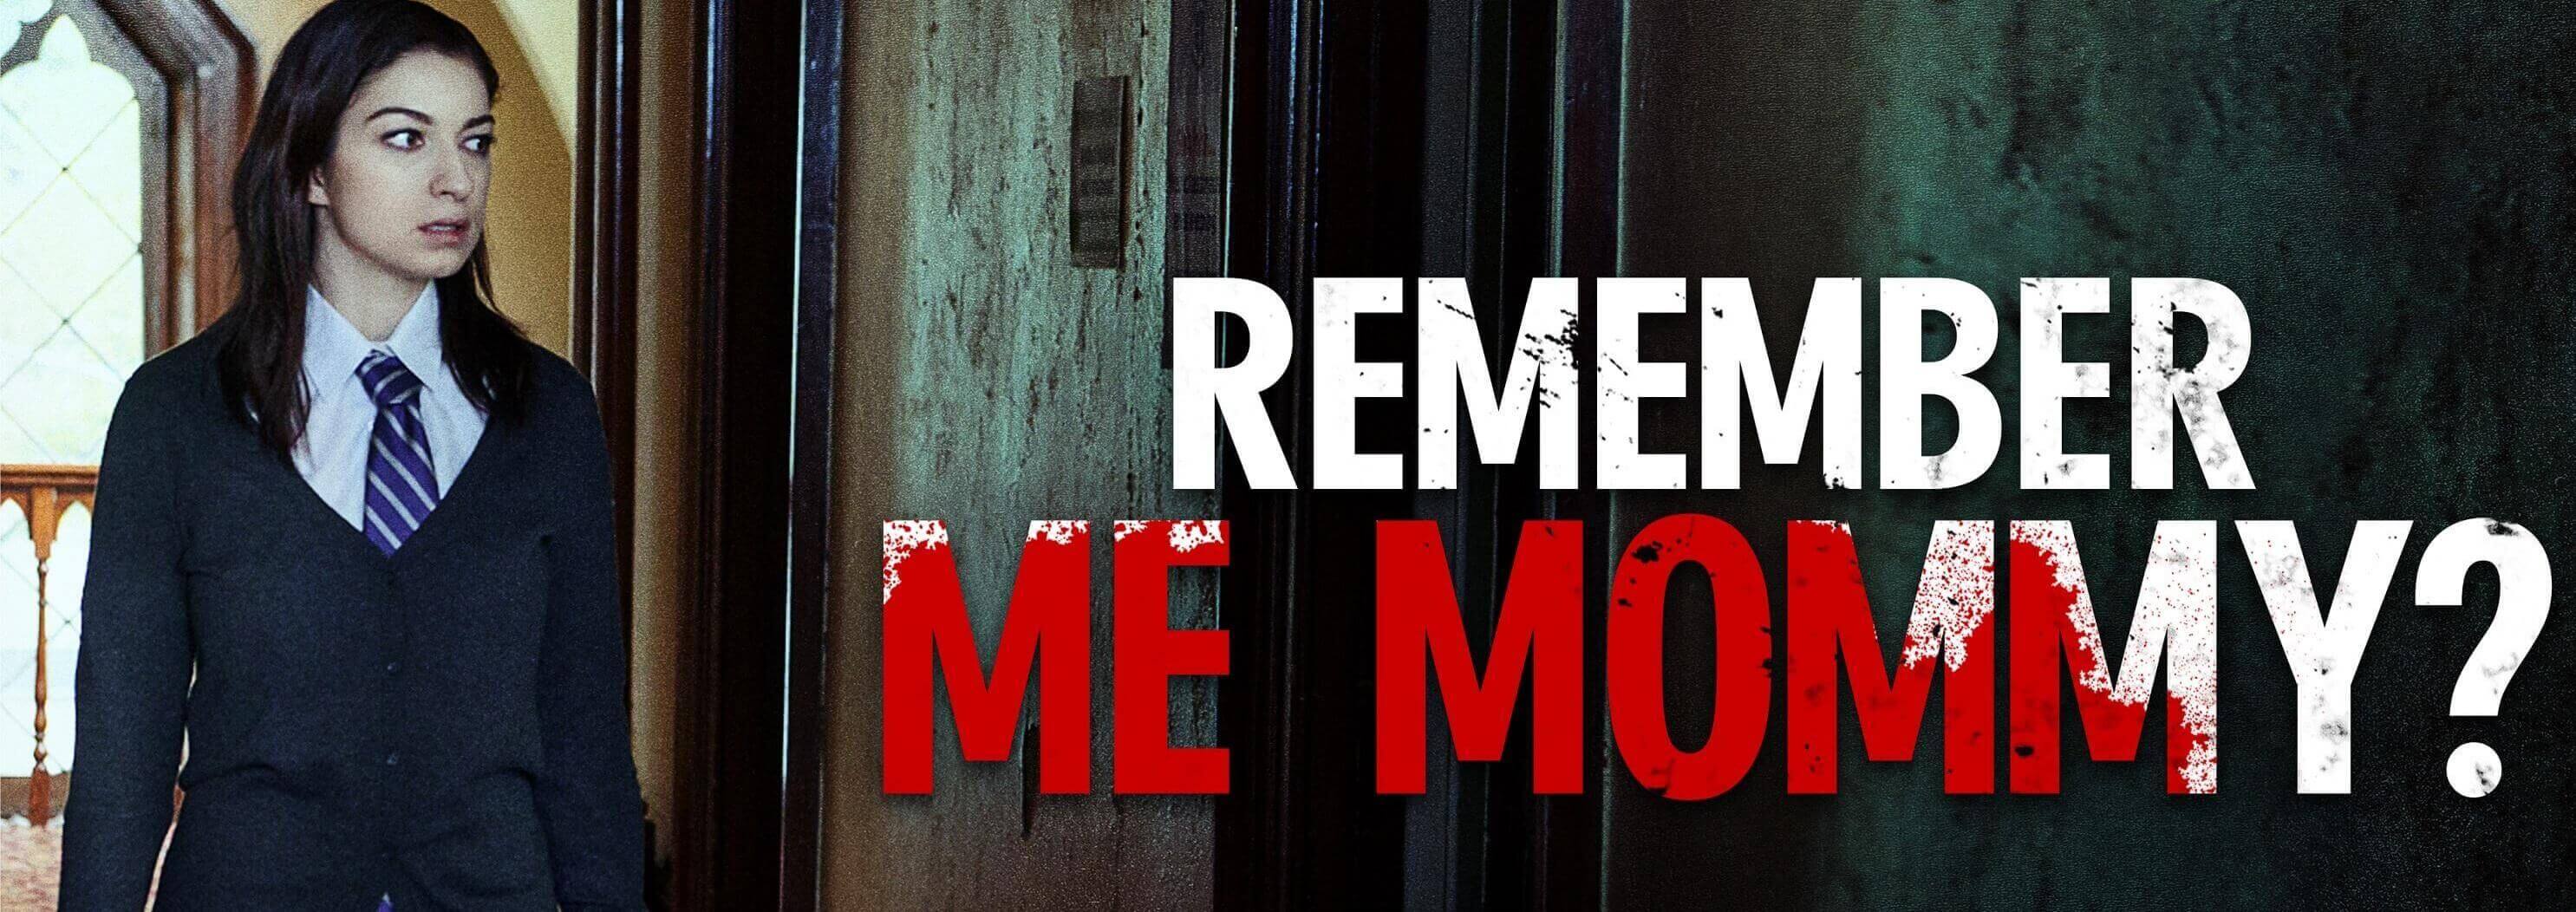 Watch Remember Me, Mommy (2020) LIFETIME Cast, Watch Online, Full Movie Download